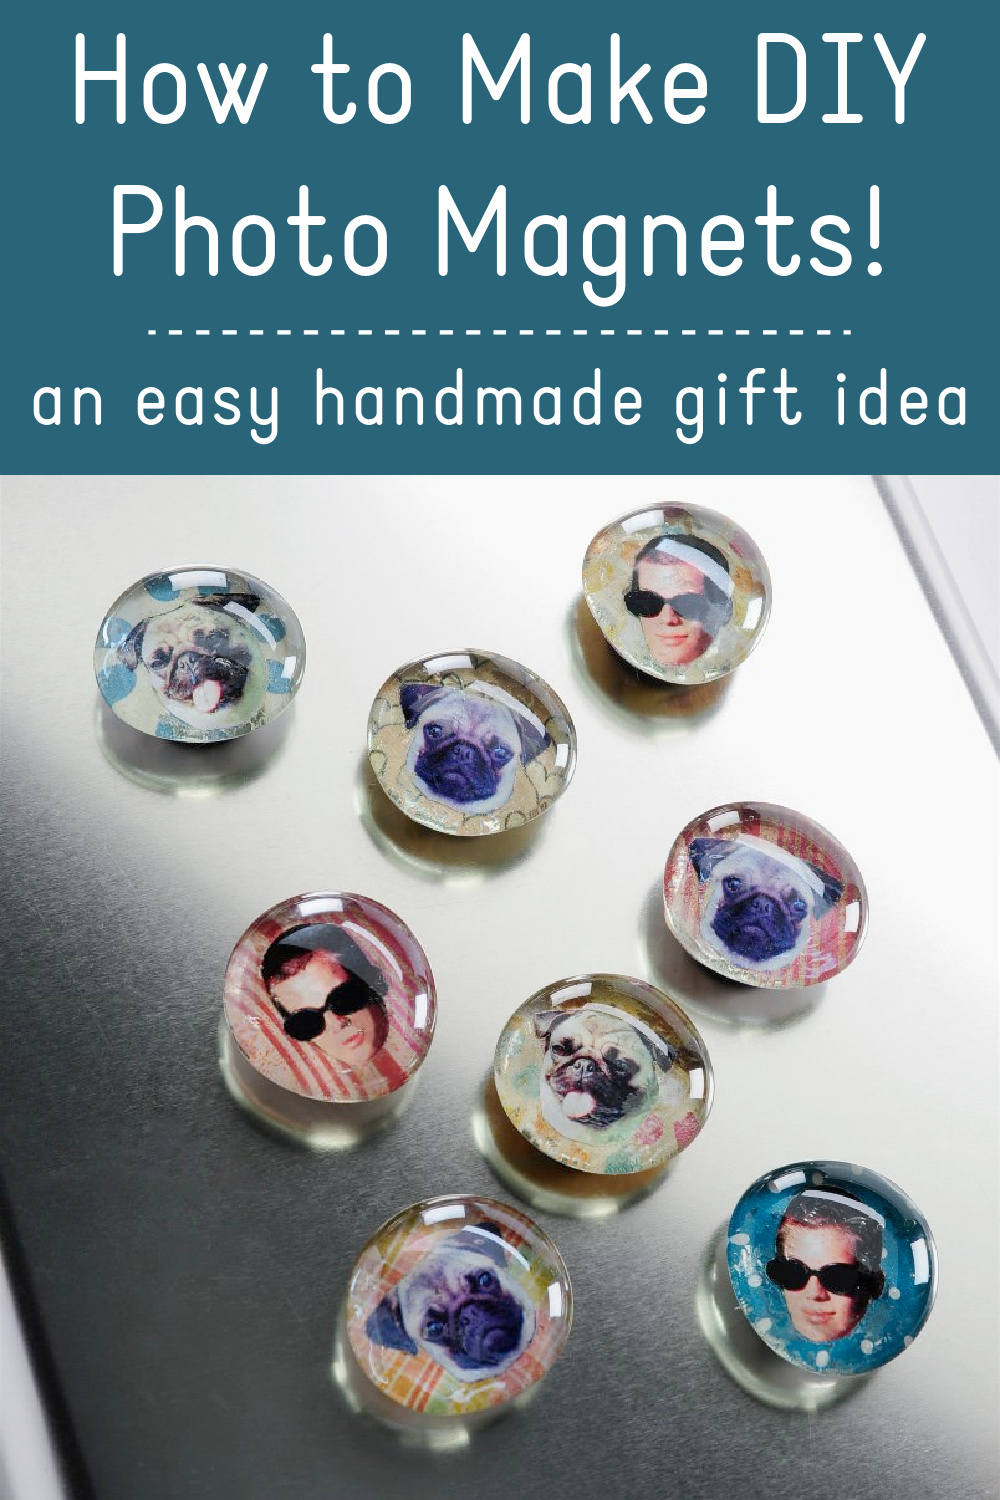 How to make DIY photo magnets